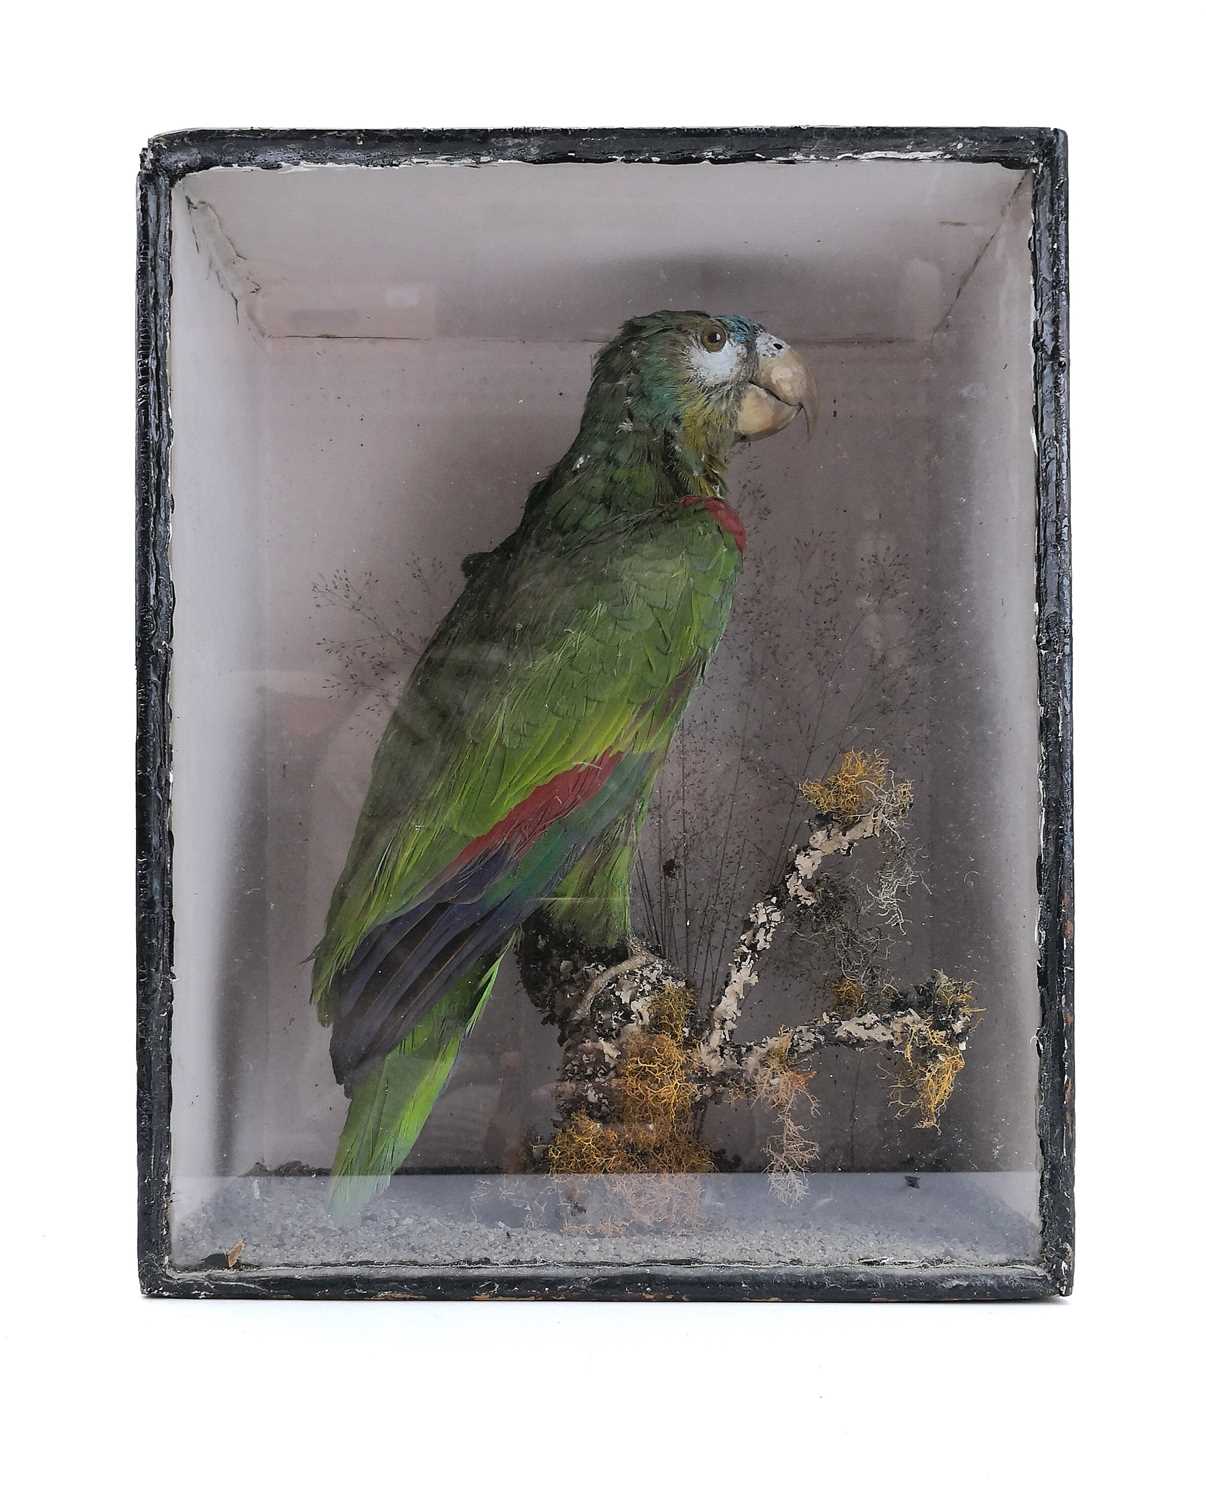 A late 19th century taxidermy study of a parrot in a glazed display case.